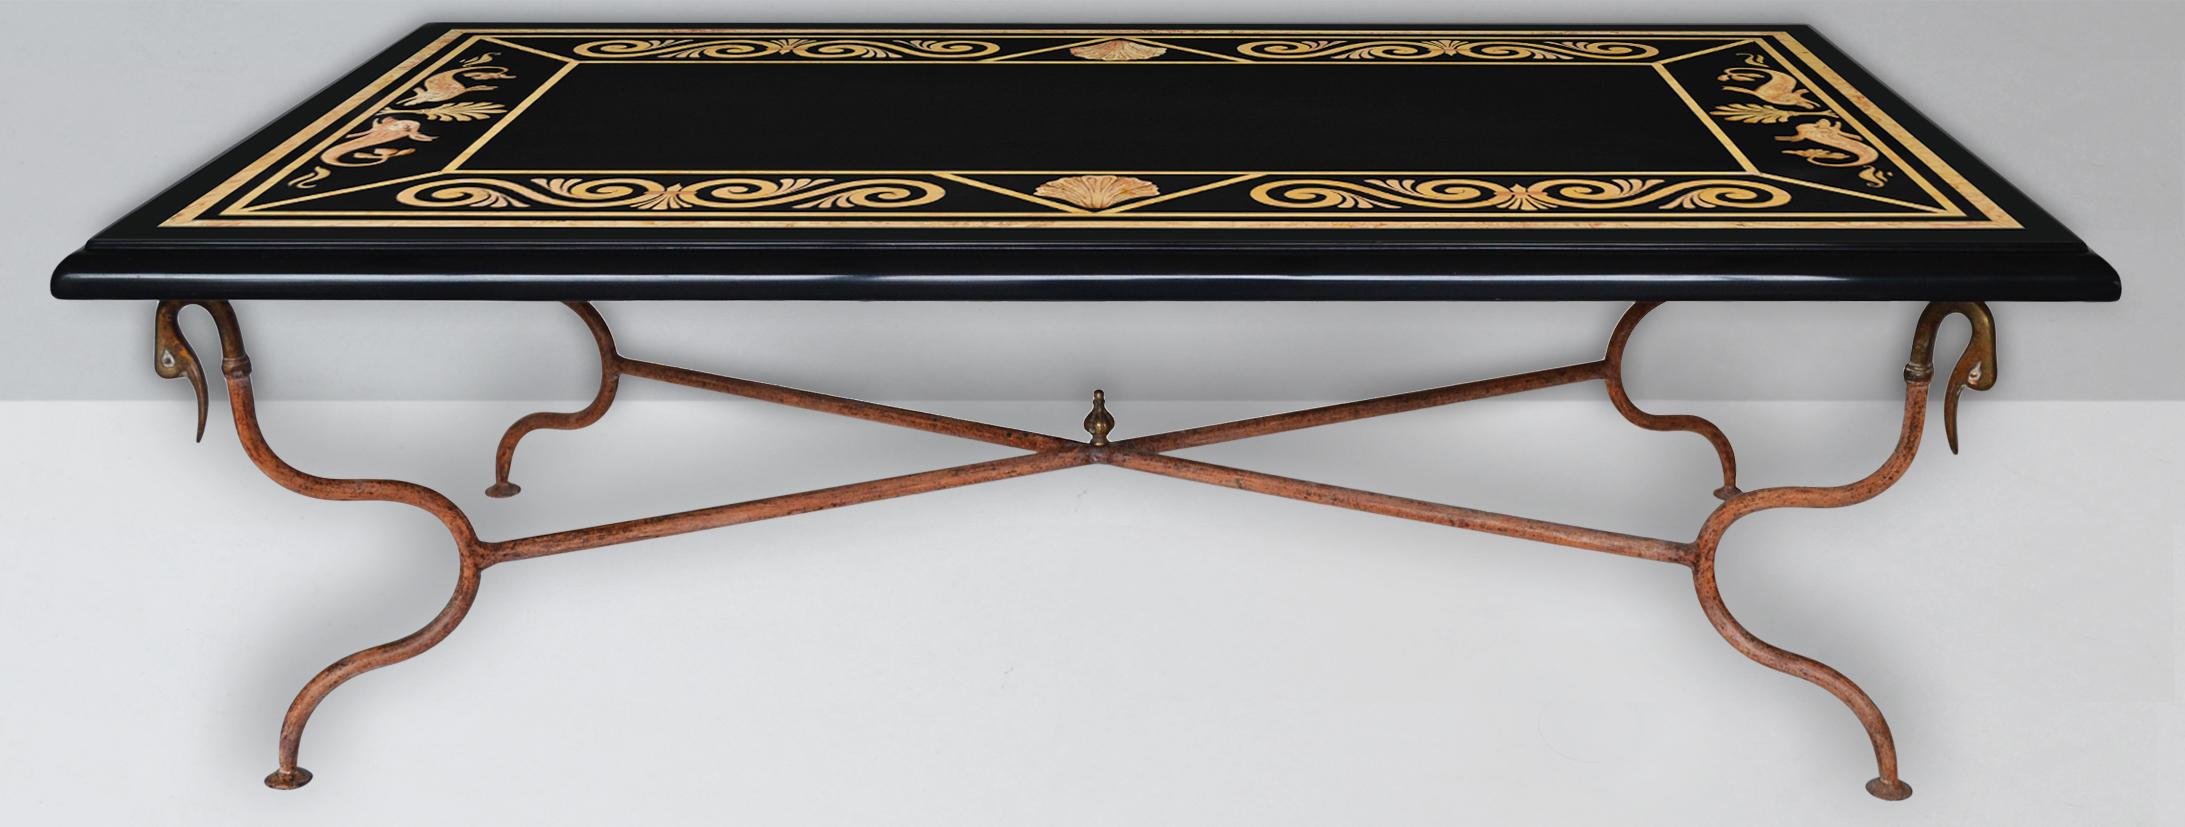 Black coffee table slate top scagliola art inlays whrought metal base and brass.
Showcasing an artistic  and refined design exquisitely handcrafted  on a black
slate , this coffee table will make a  stately addition to a modern decor. Its sleek